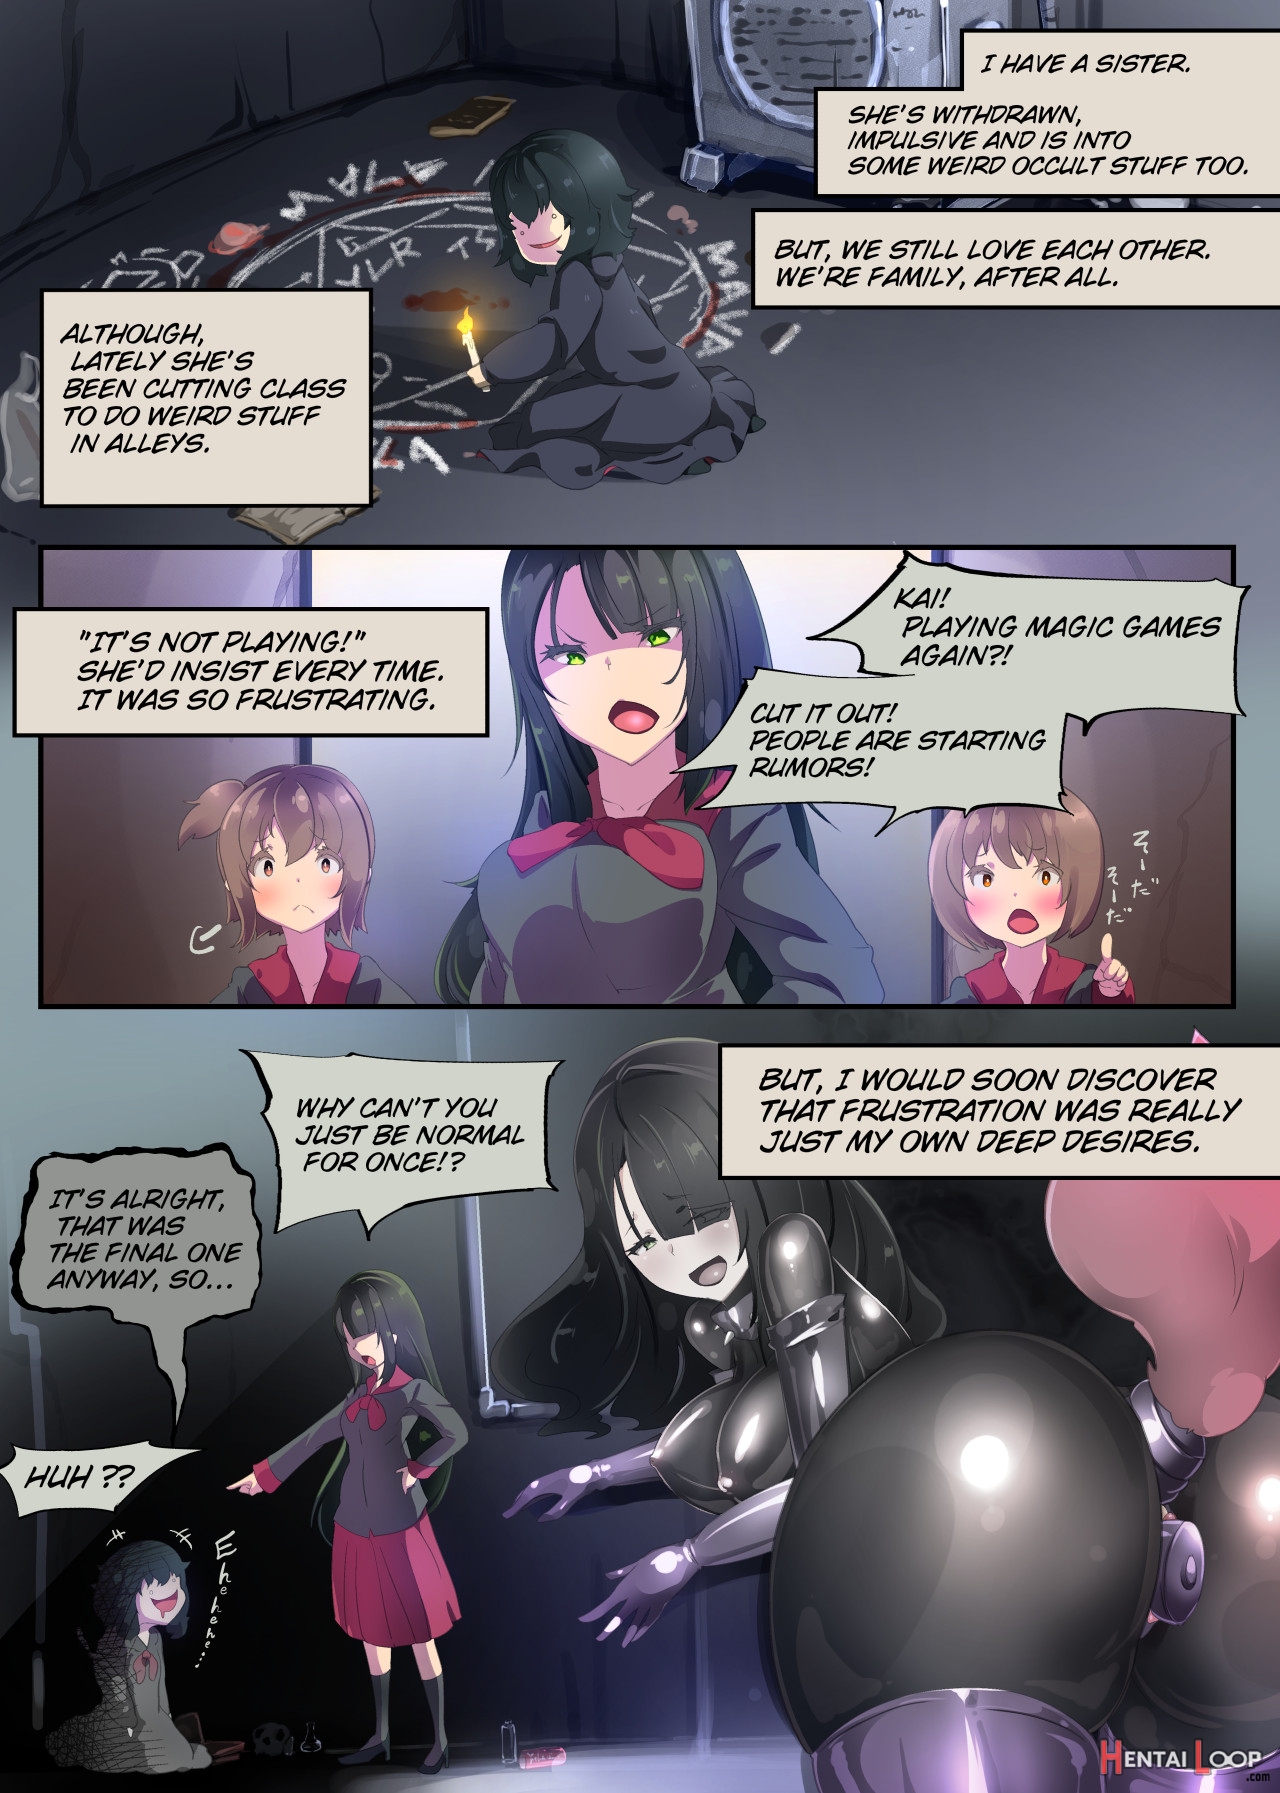 Puppy Love: A Story Where A Corrupted Girl Enslaves Her Sister! page 3